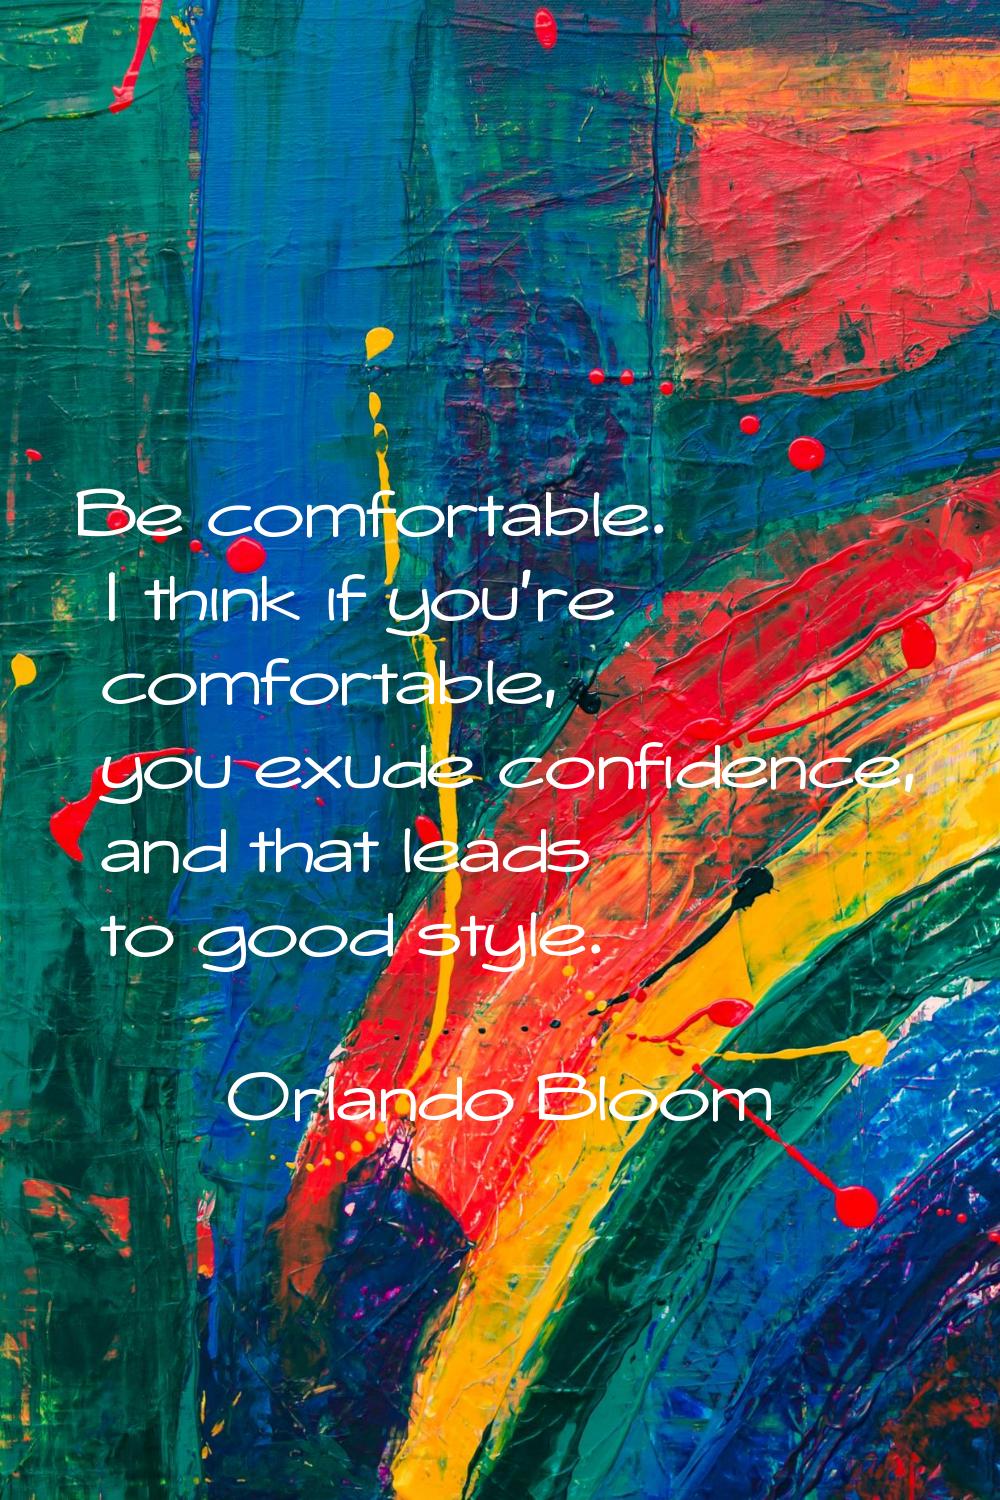 Be comfortable. I think if you're comfortable, you exude confidence, and that leads to good style.